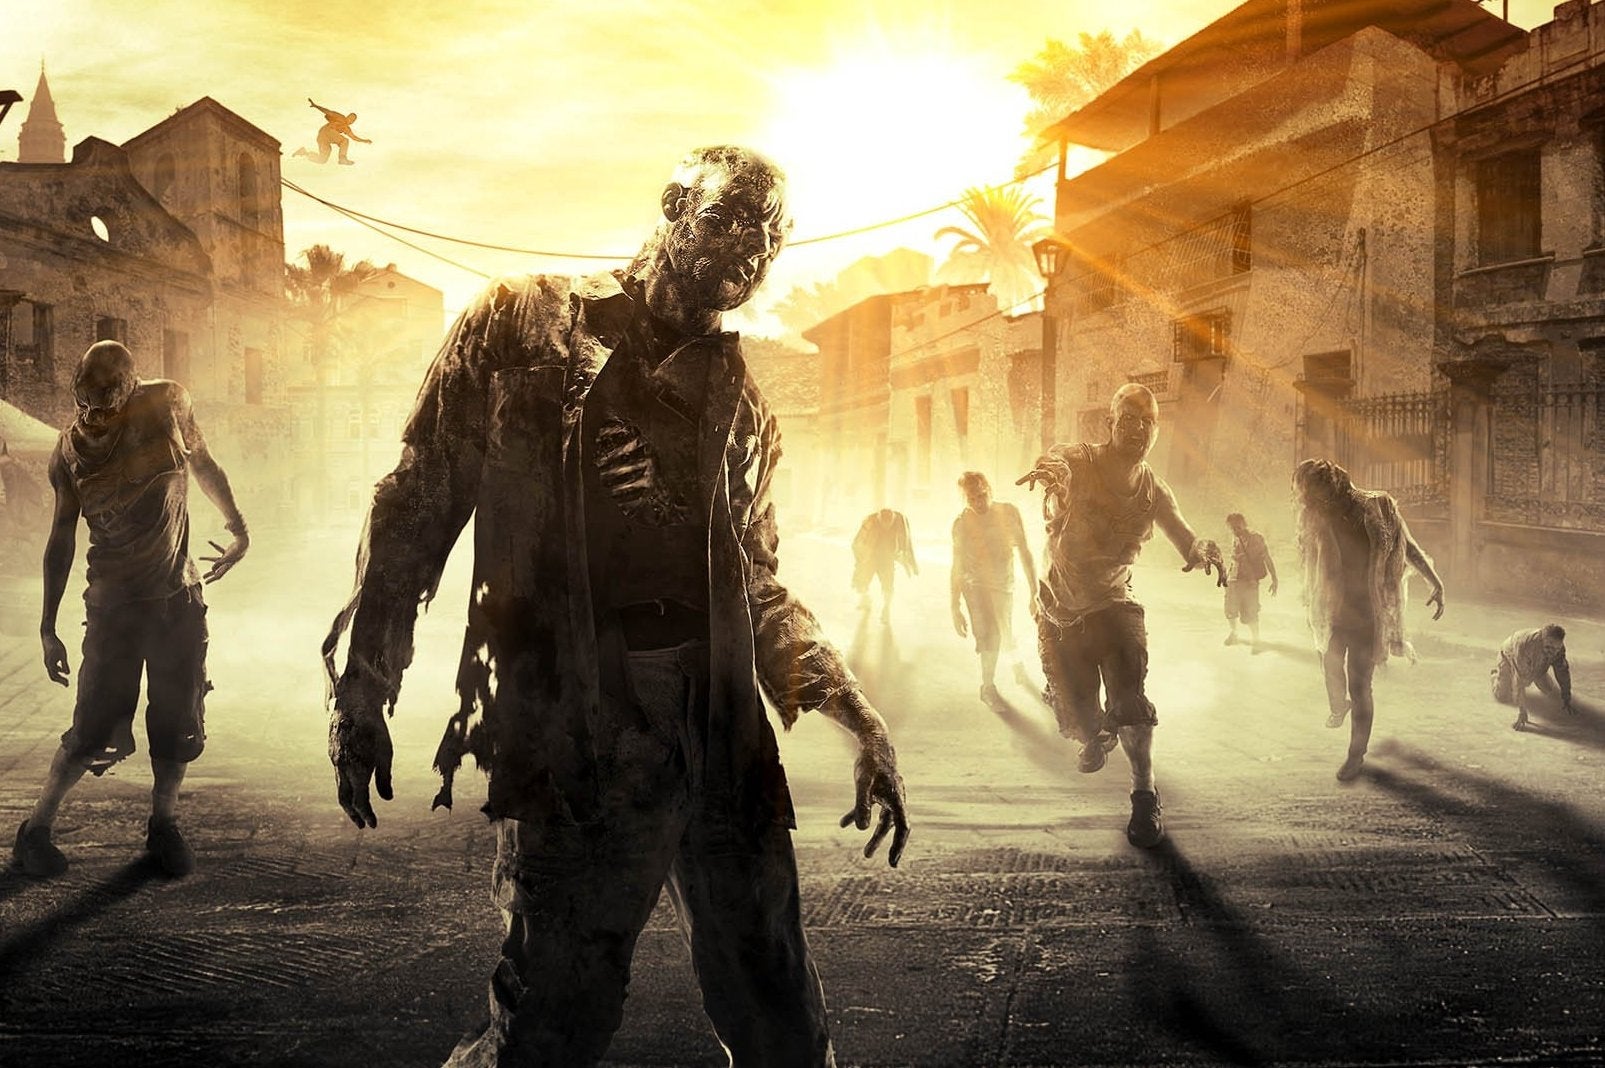 Image for Video: Parkouring clones run errands in Dying Light co-op